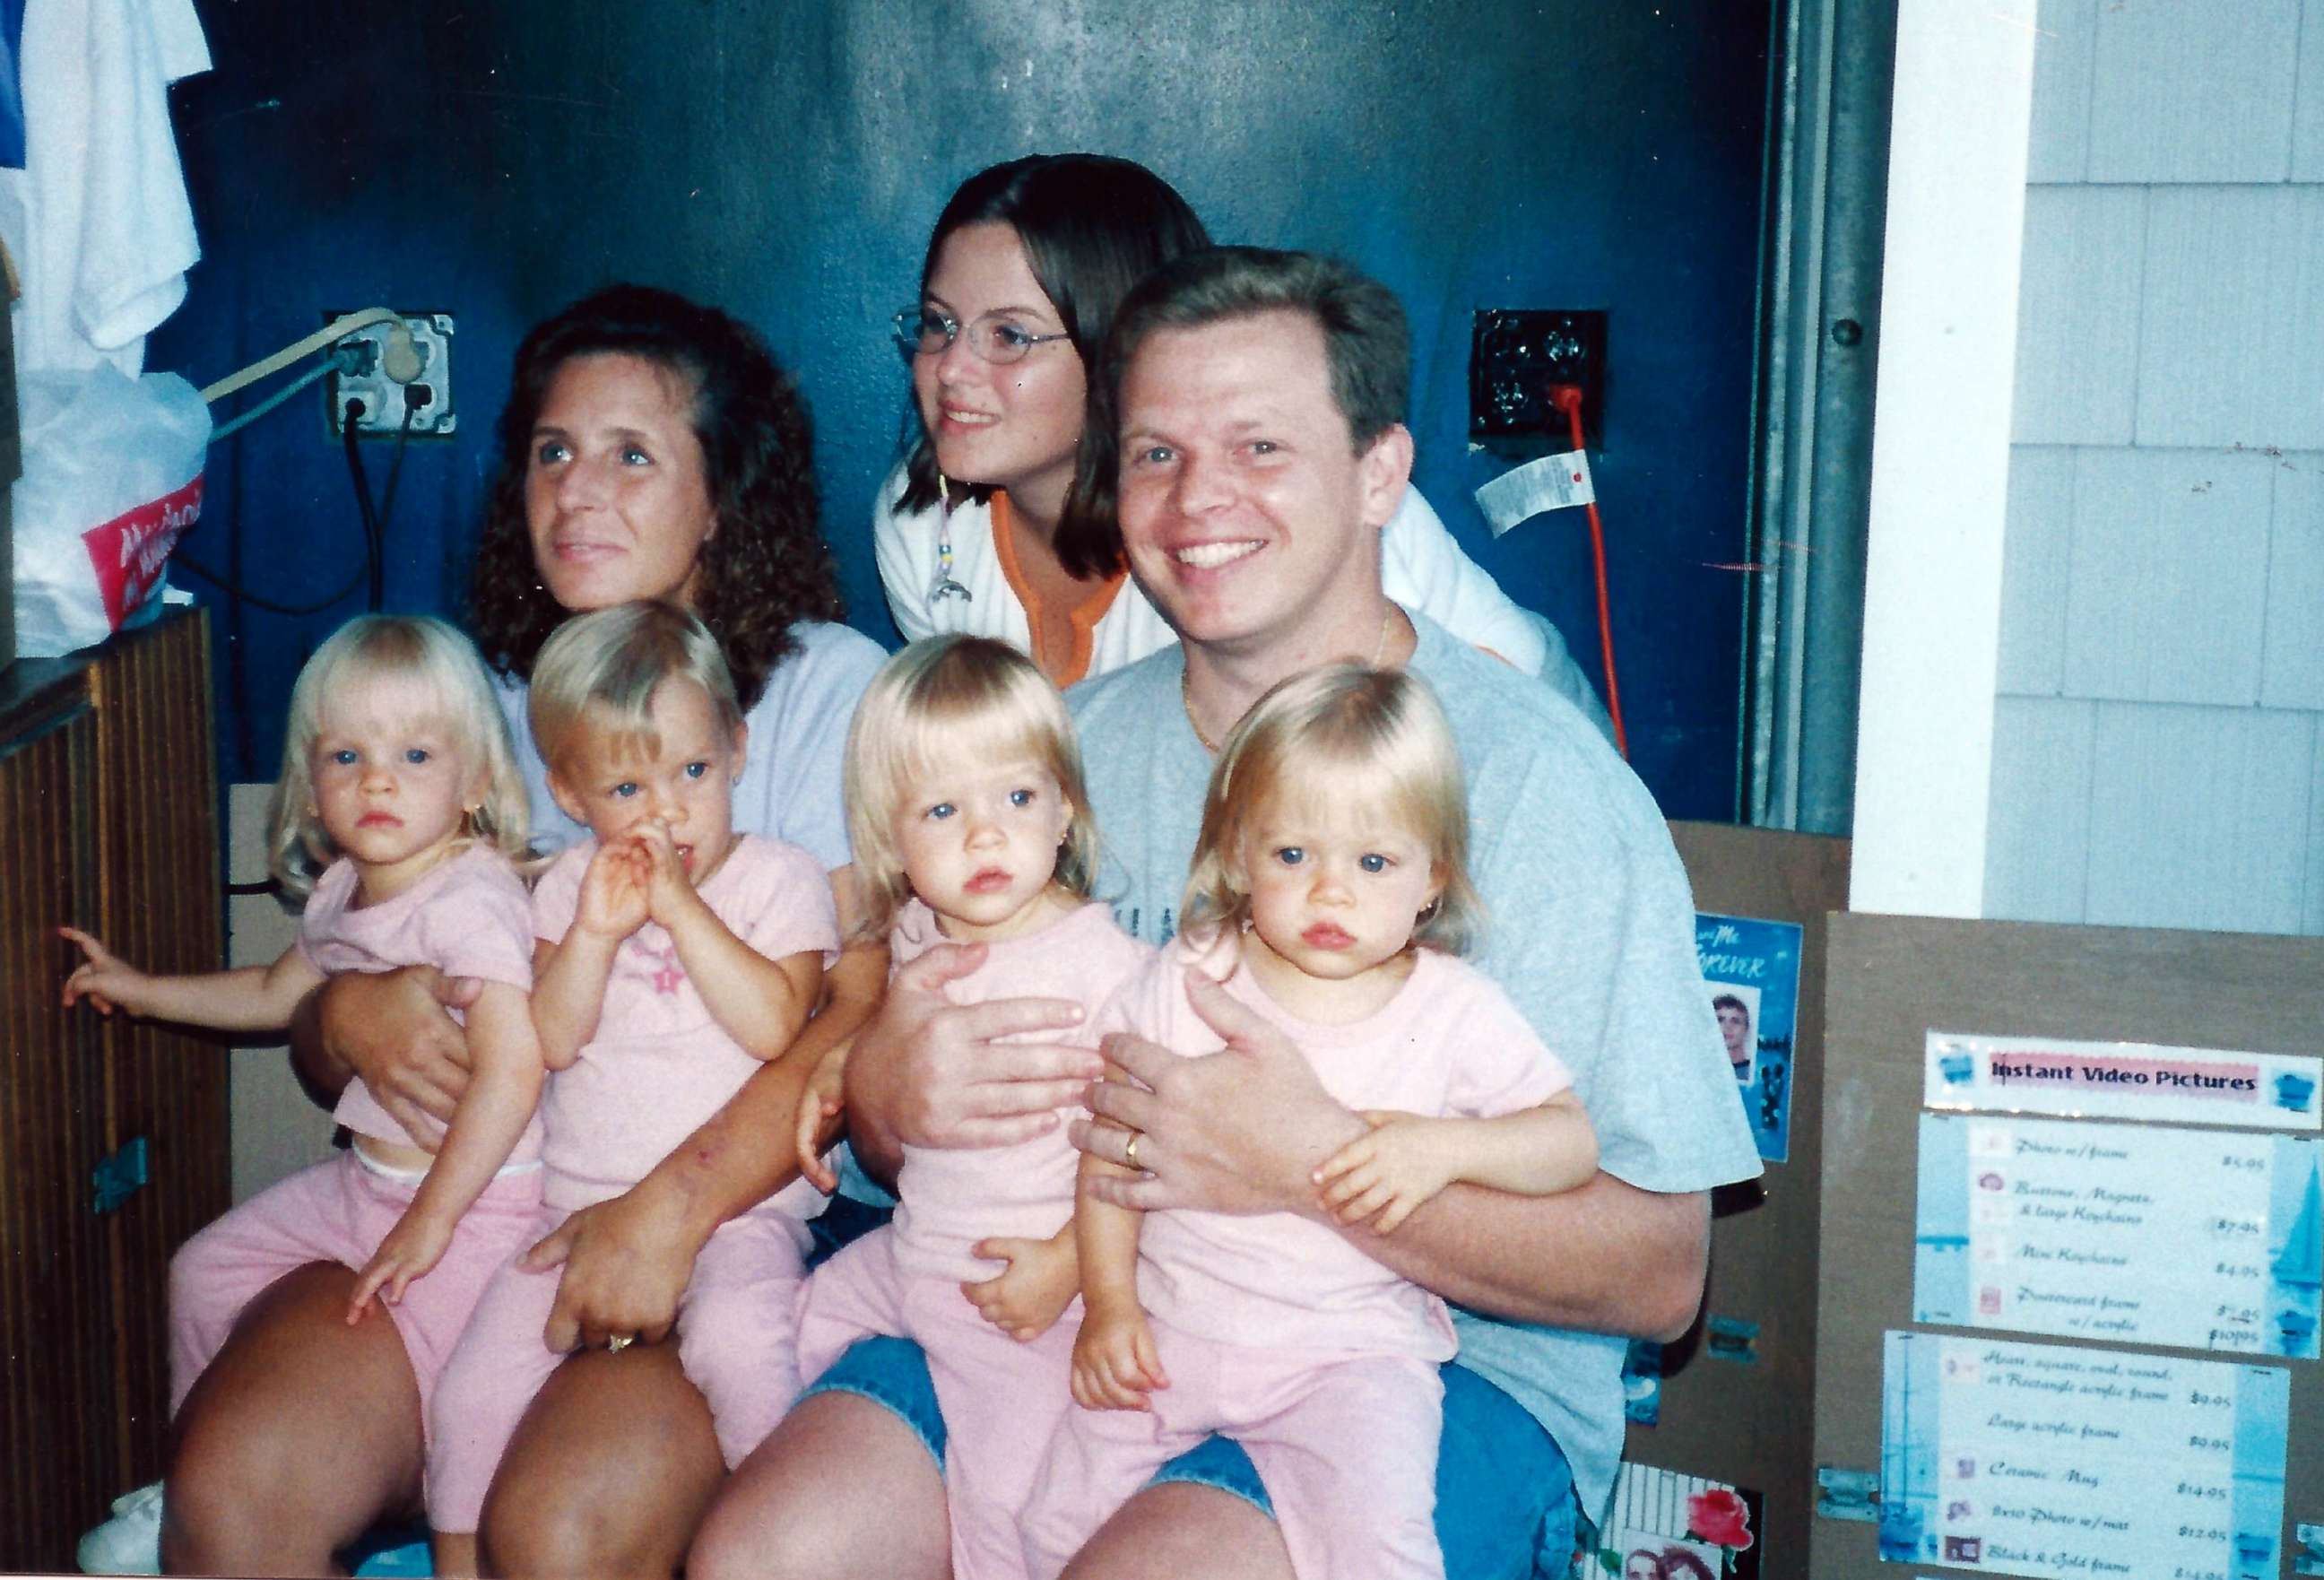 PHOTO: Michael and Toni Murphy pose with their children in this undated family photo.